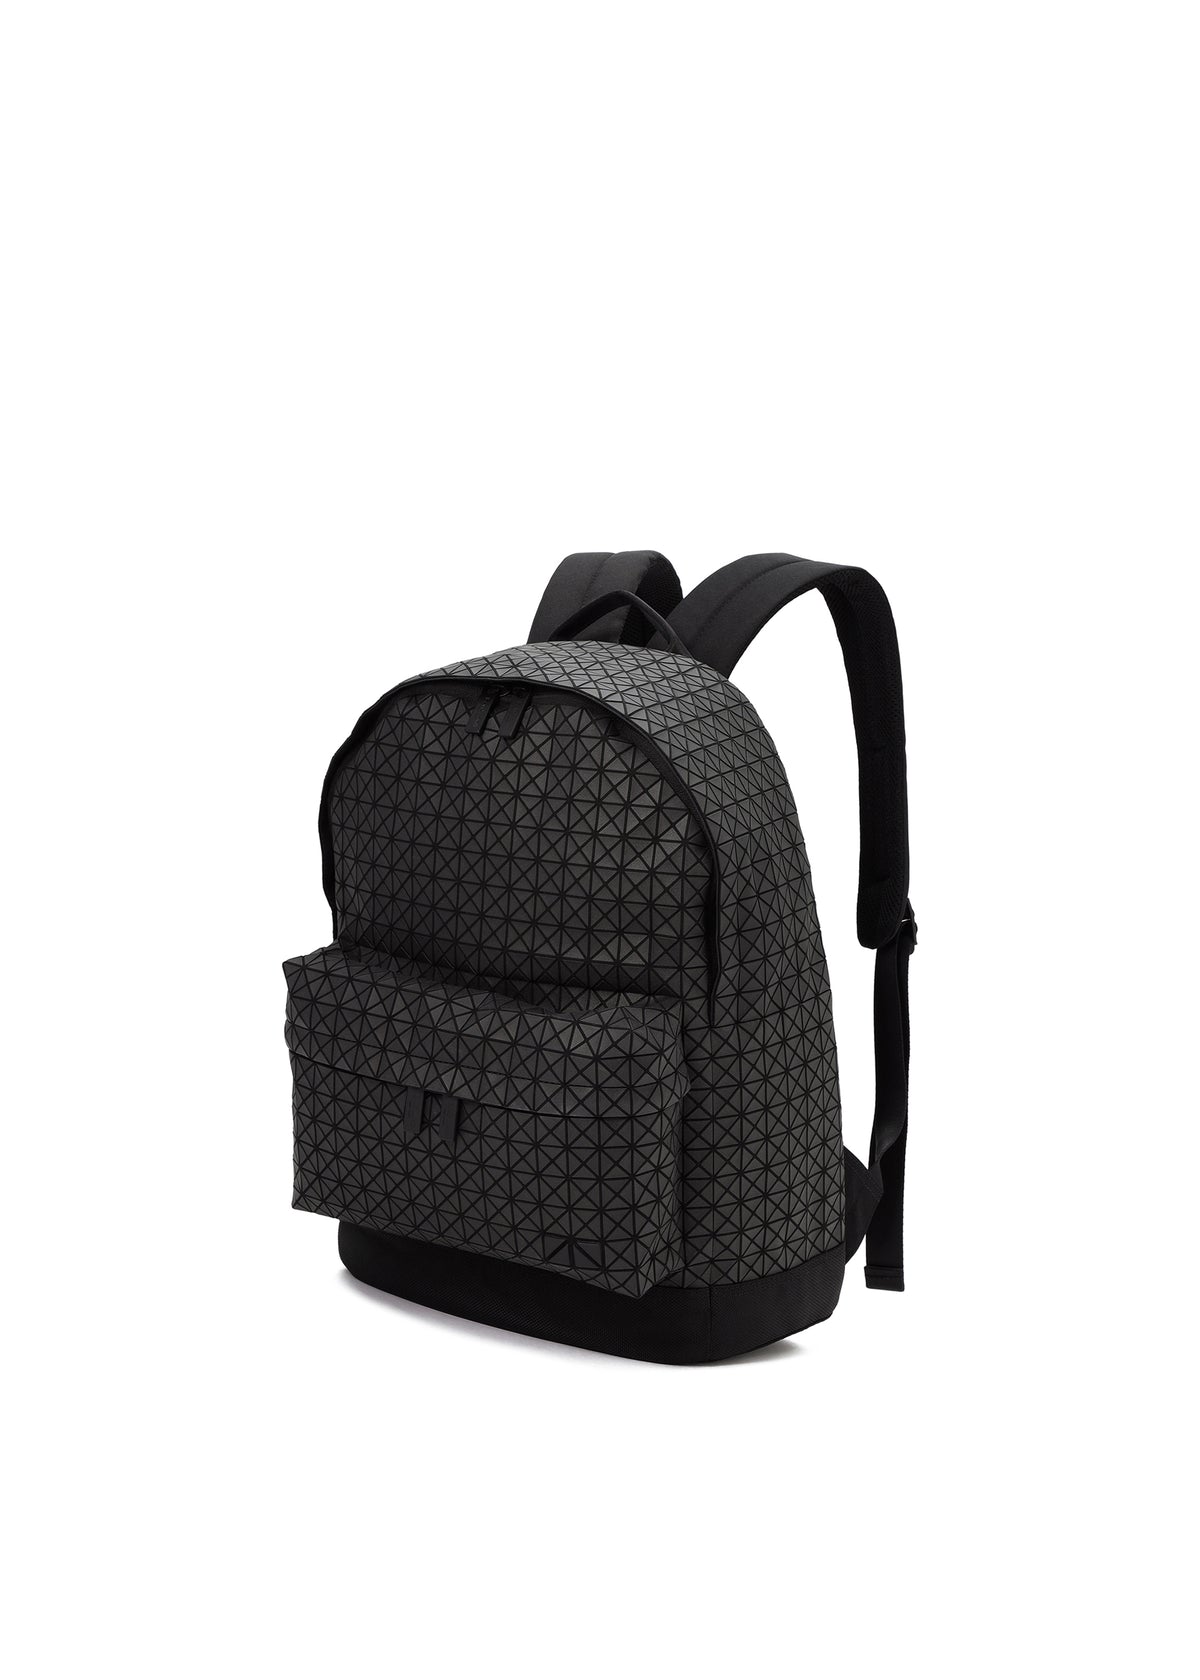 DAYPACK、バッグ&財布_バックパック、ディテール画像1